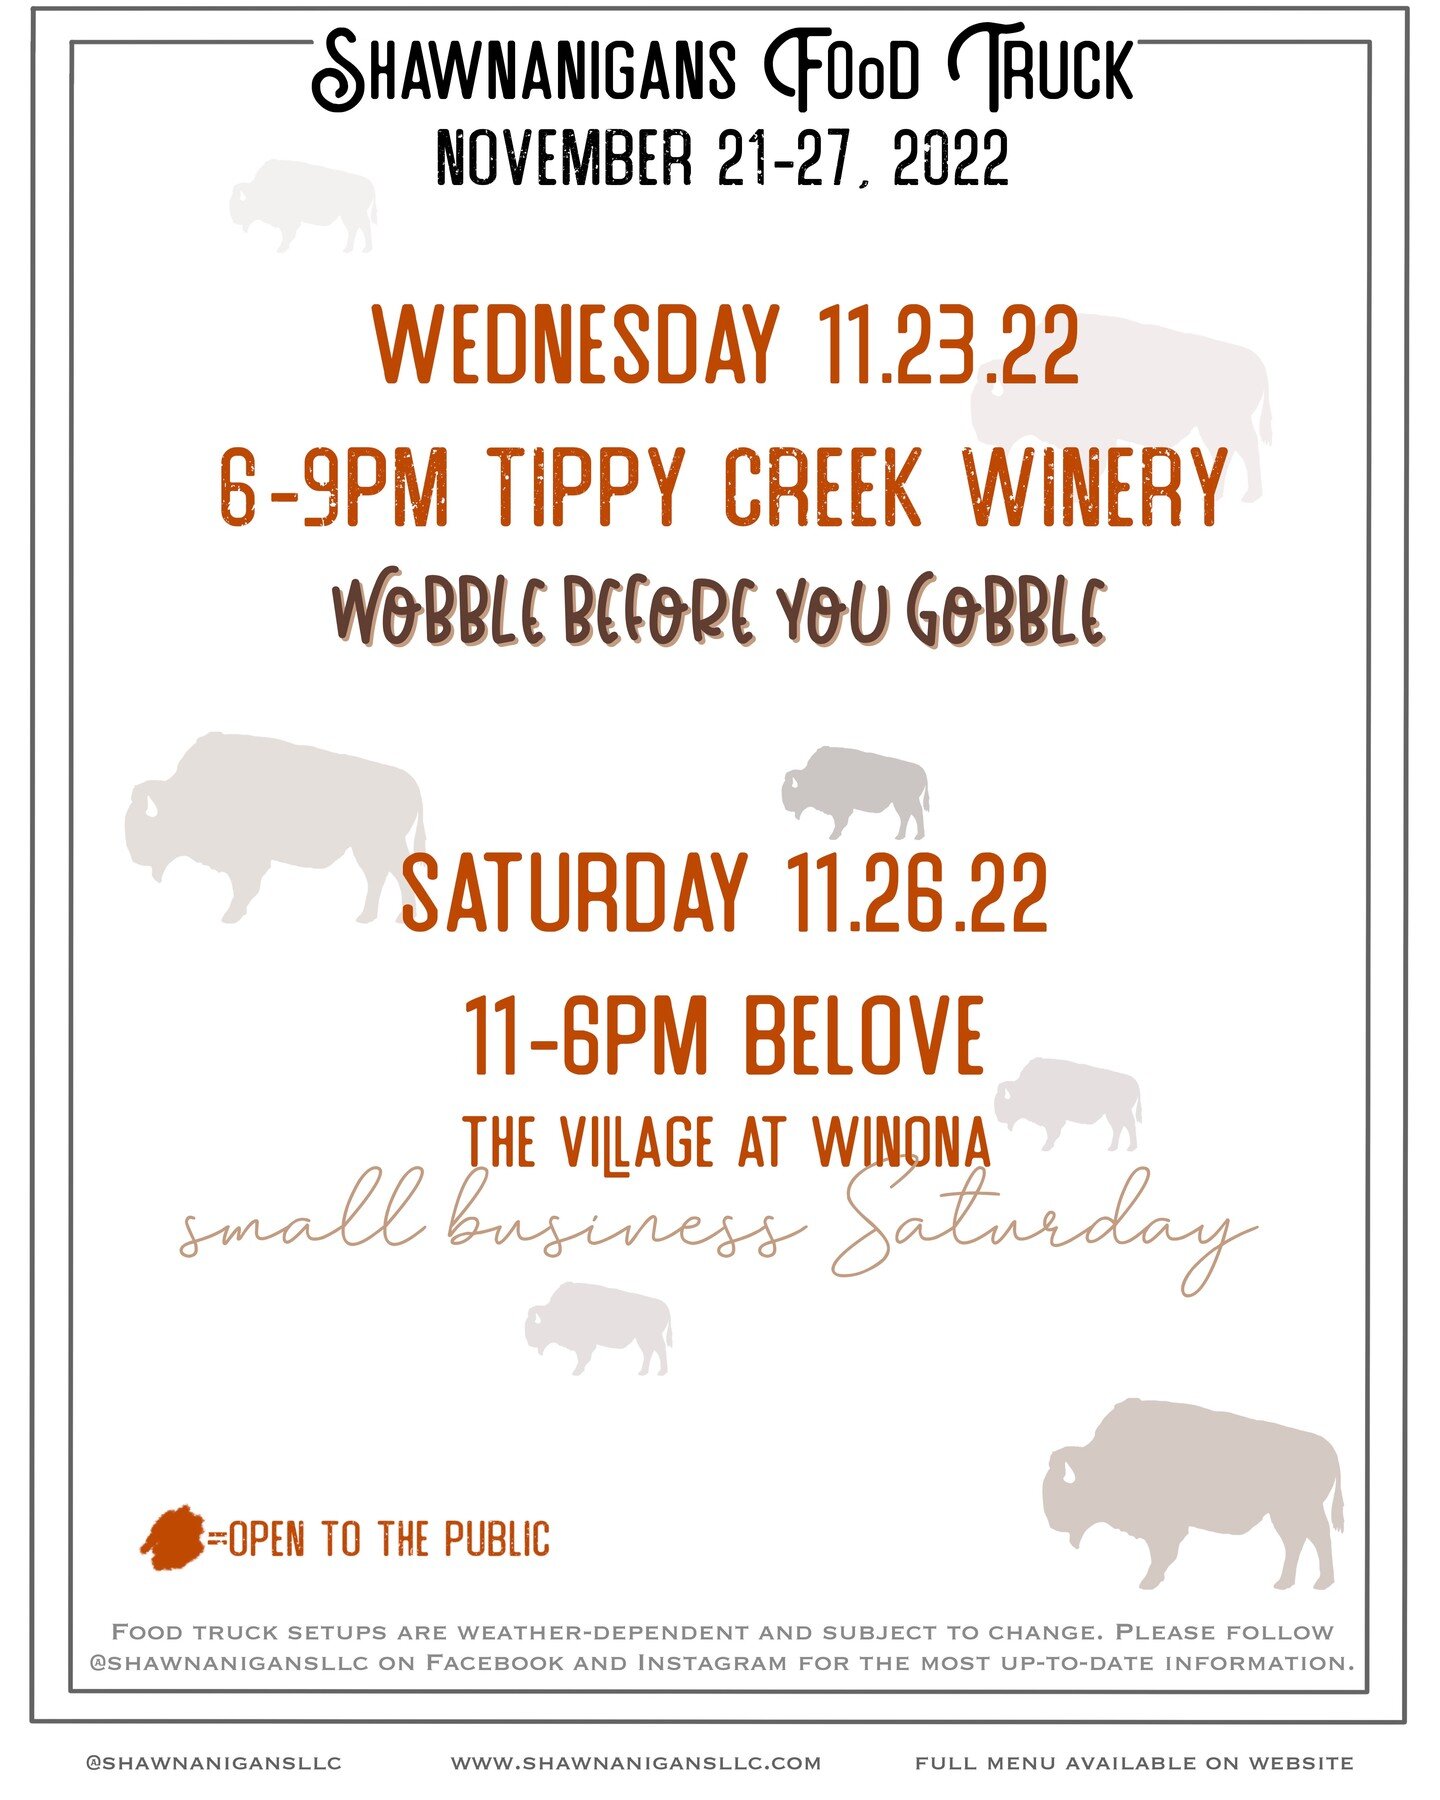 Happy Thanksgiving week! We have just two setups this week, but they're both going to be so fun because we get to hang out with some of our favorite small businesses. 

On Wednesday evening, find the truck at @tippycreekwinery for Wobble Before You G